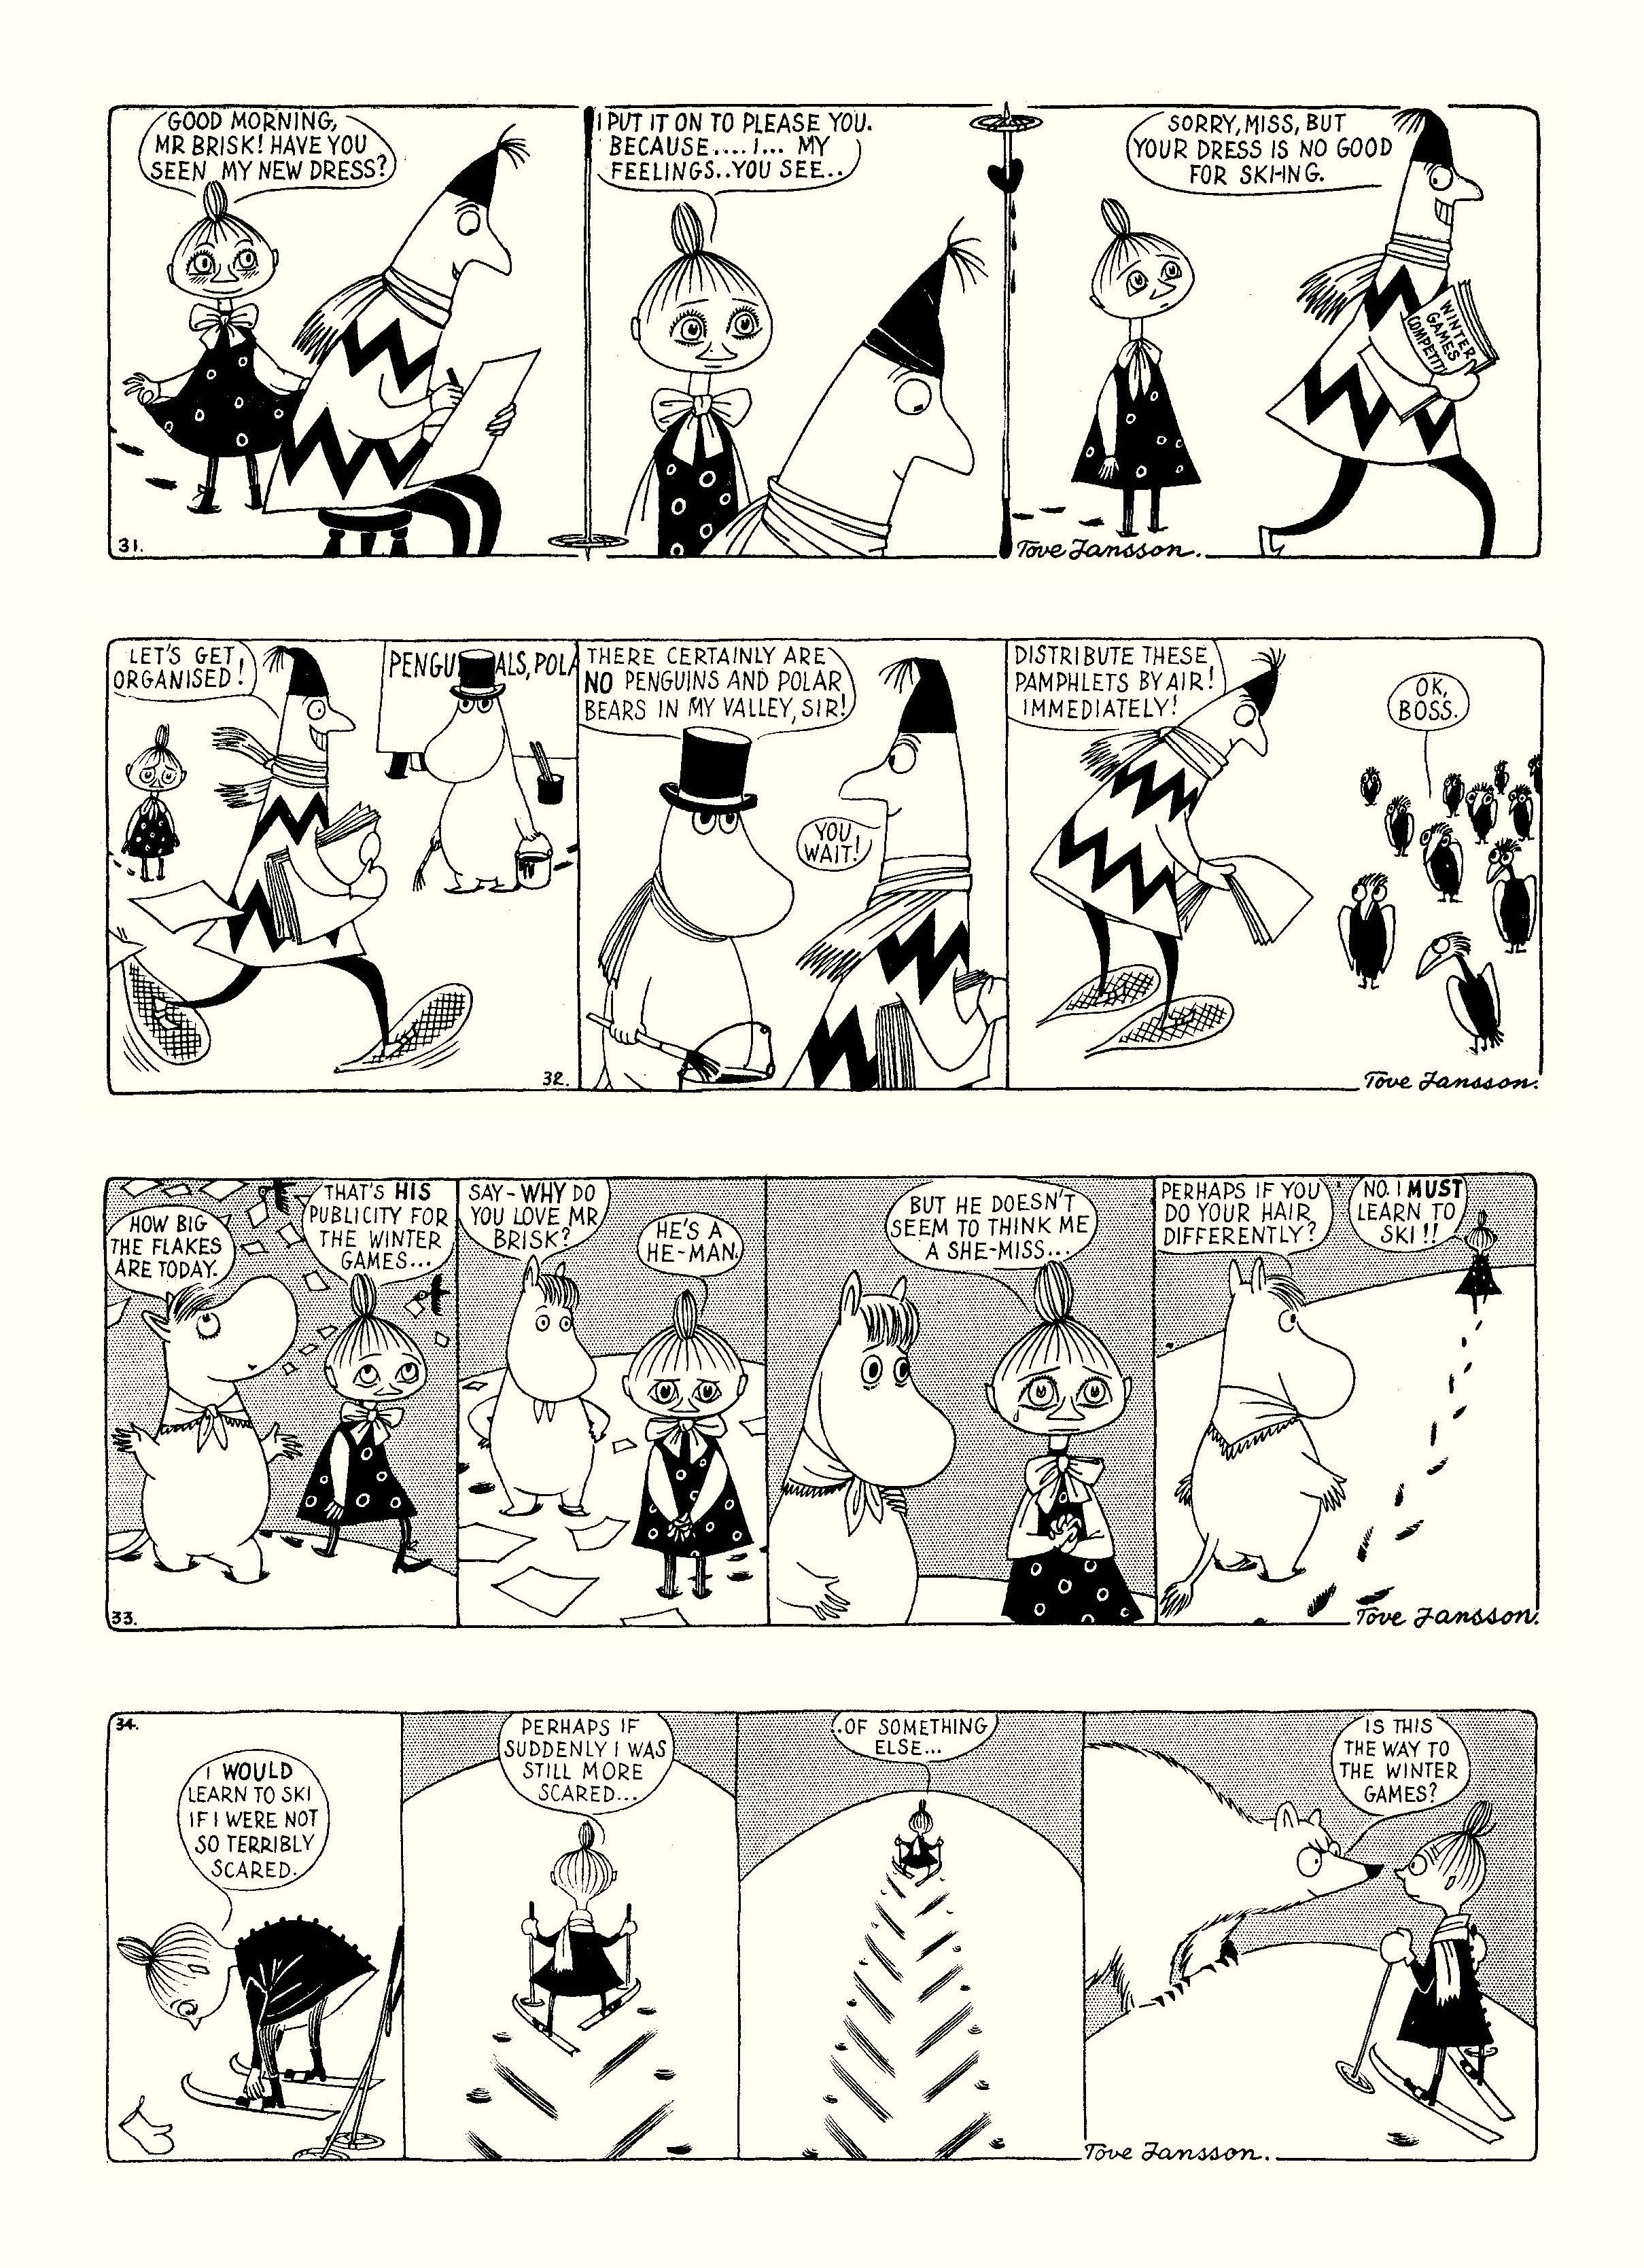 Read online Moomin: The Complete Tove Jansson Comic Strip comic -  Issue # TPB 2 - 14